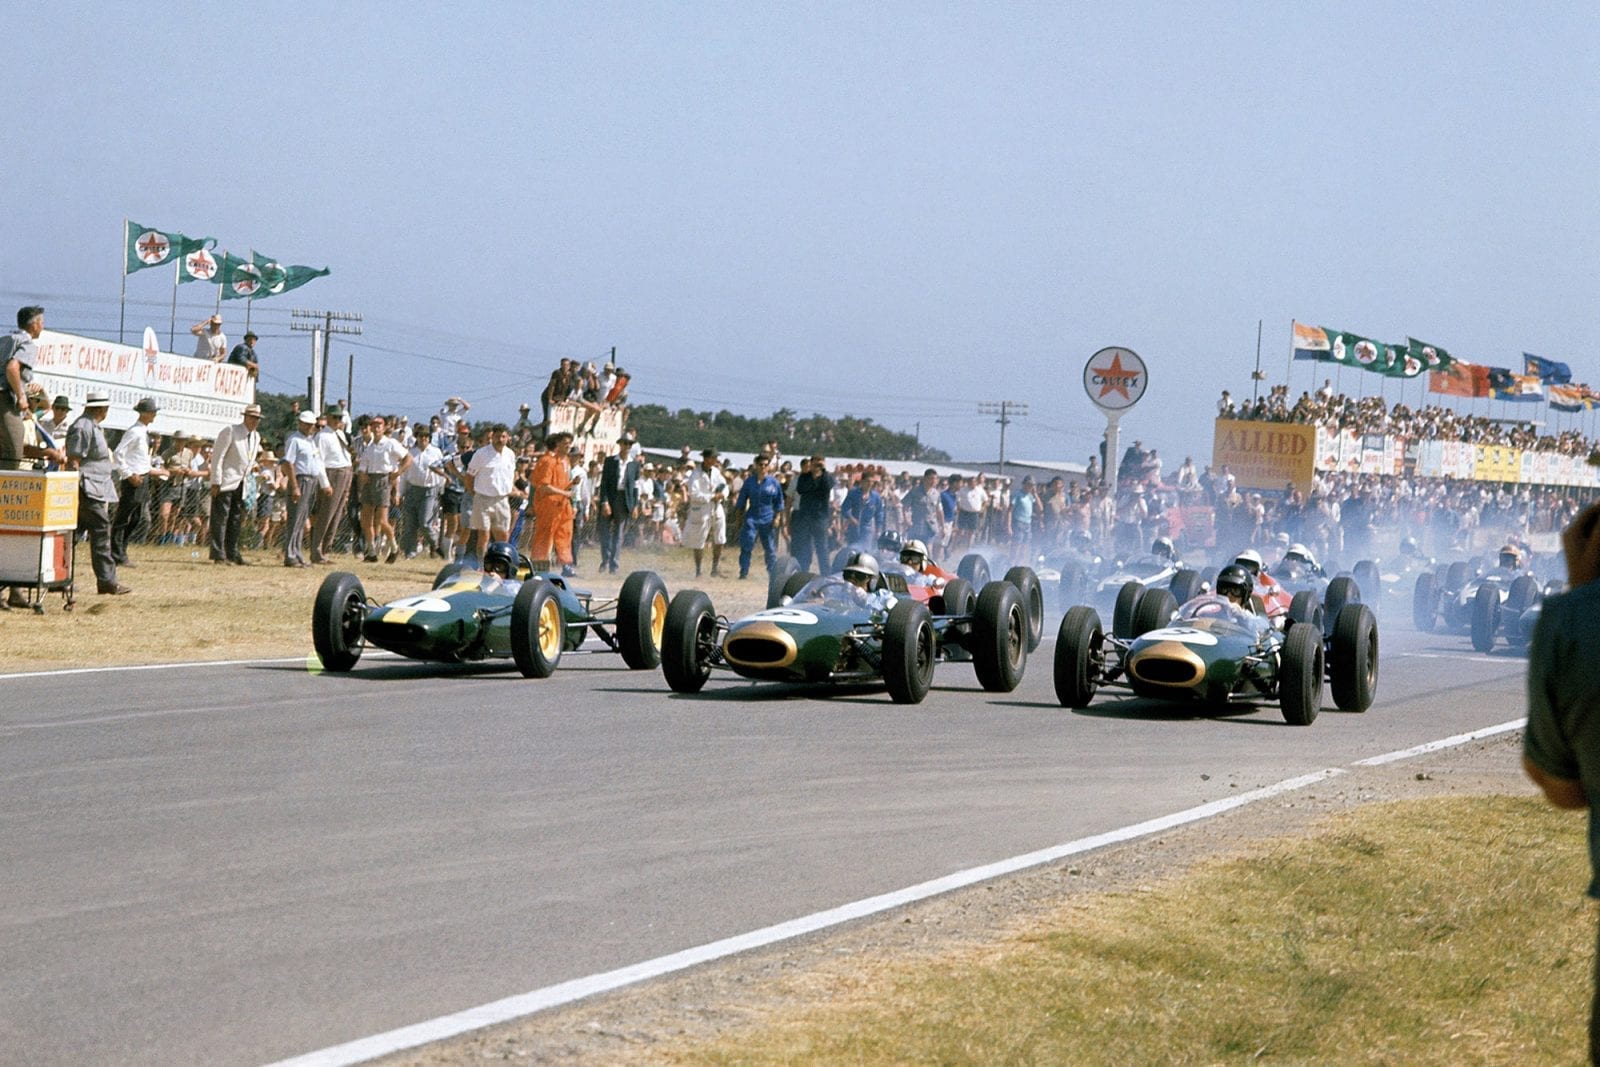 Jim Clark (Lotus 25-Climax), Jack Brabham (Brabham BT7-Climax) and Dan Gurney (Brabham BT7-Climax) lead off the front row of the grid at the start.